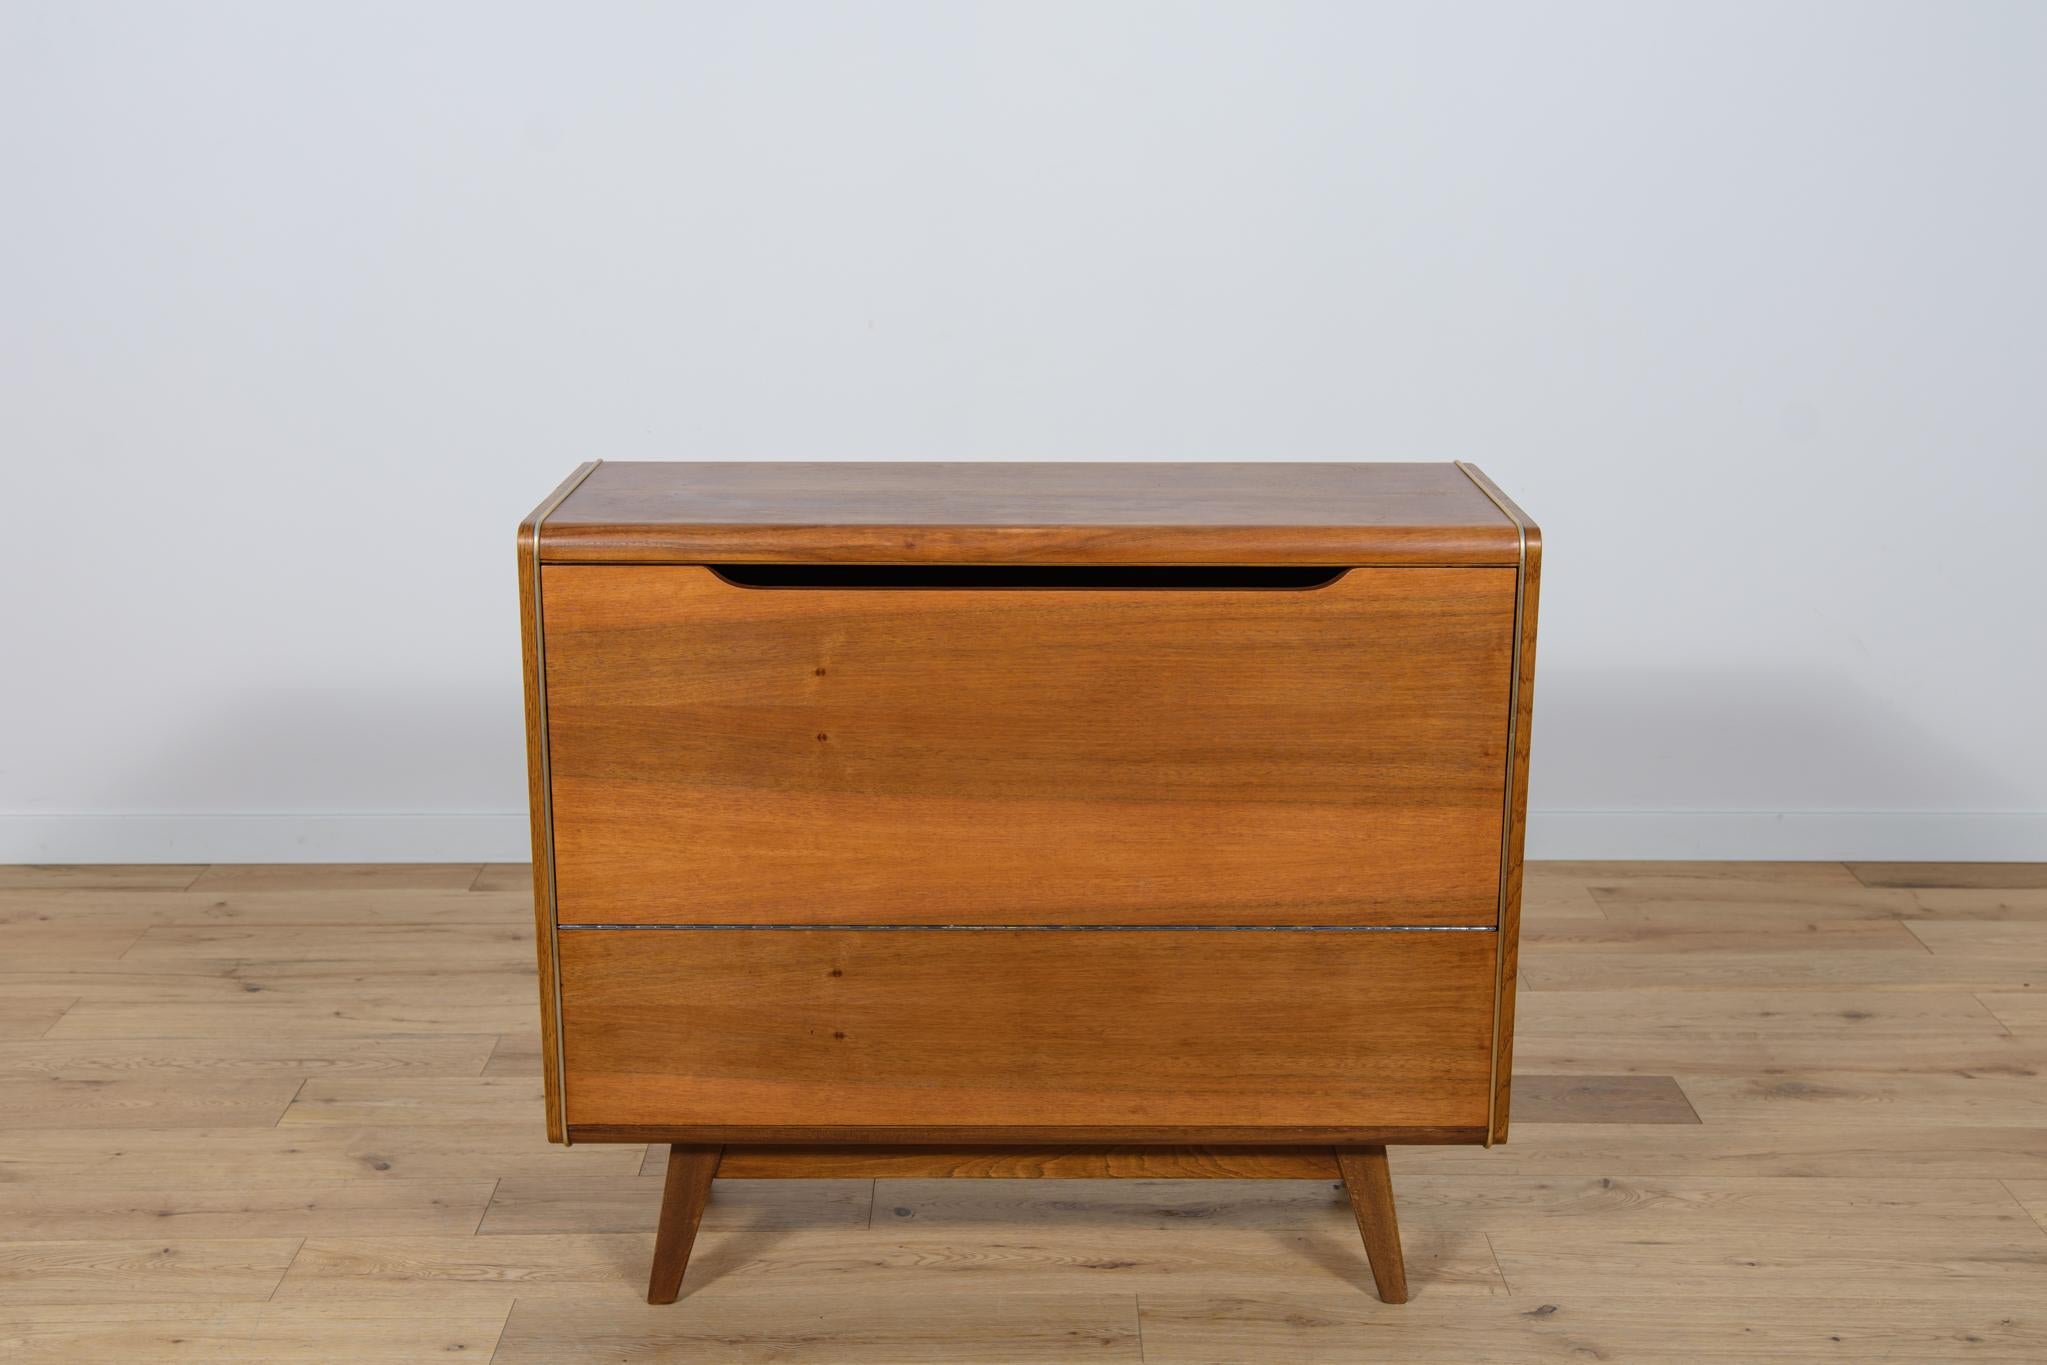 
The furniture was designed by Bohumil Landsman in the 1960s. It was produced by the Jitona Soběslav furniture factory in the Czech Republic. Originally, the piece of furniture was used as a chiffonier. During the renovation, the function of the